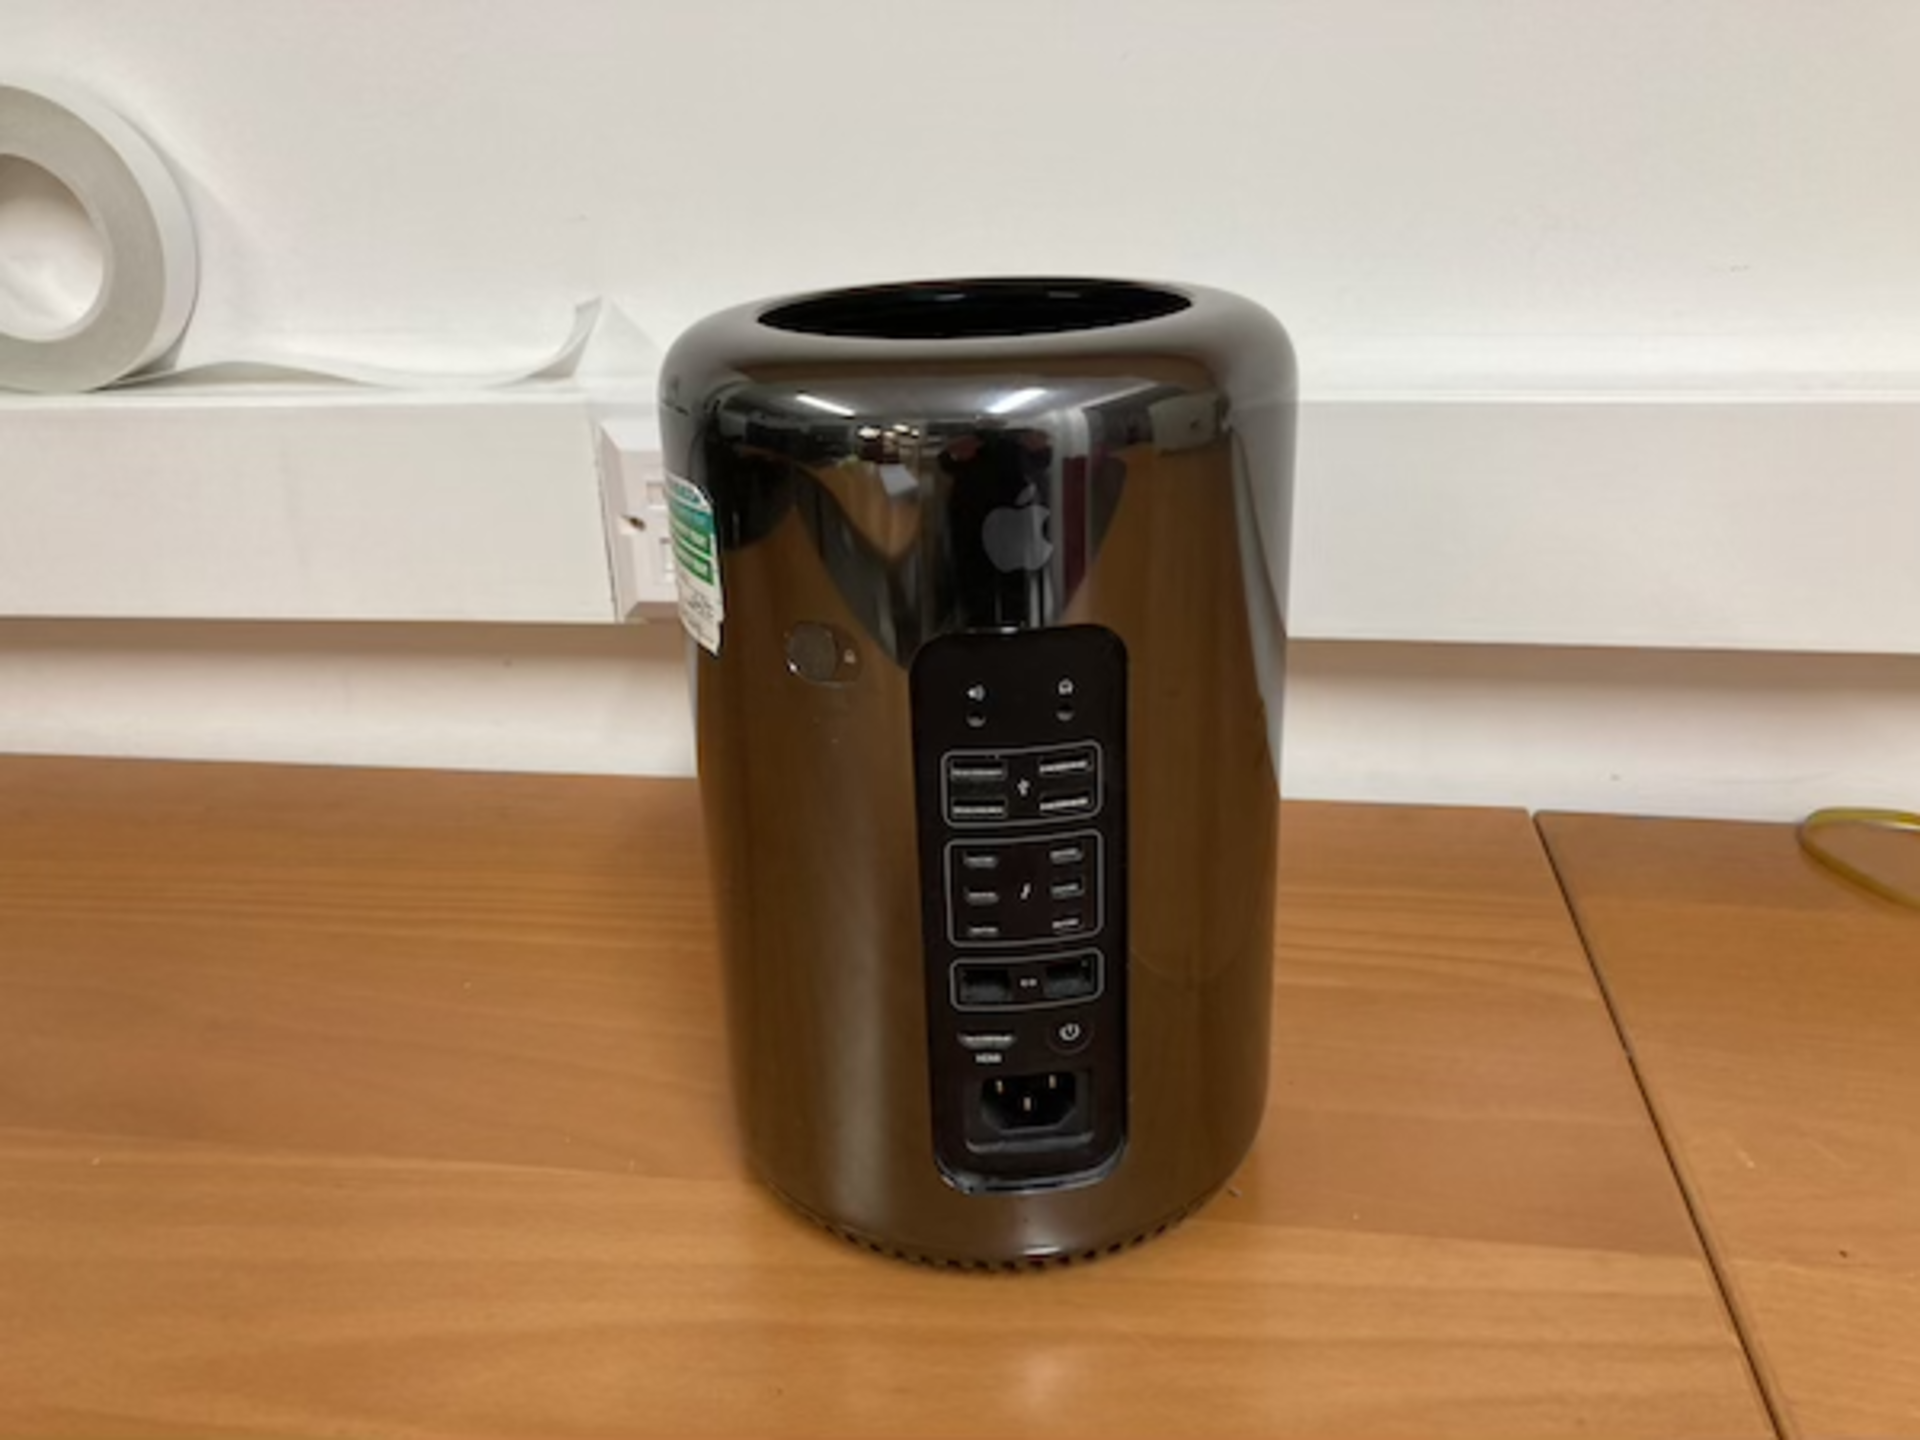 Apple MacPro A1481 tower personal computer